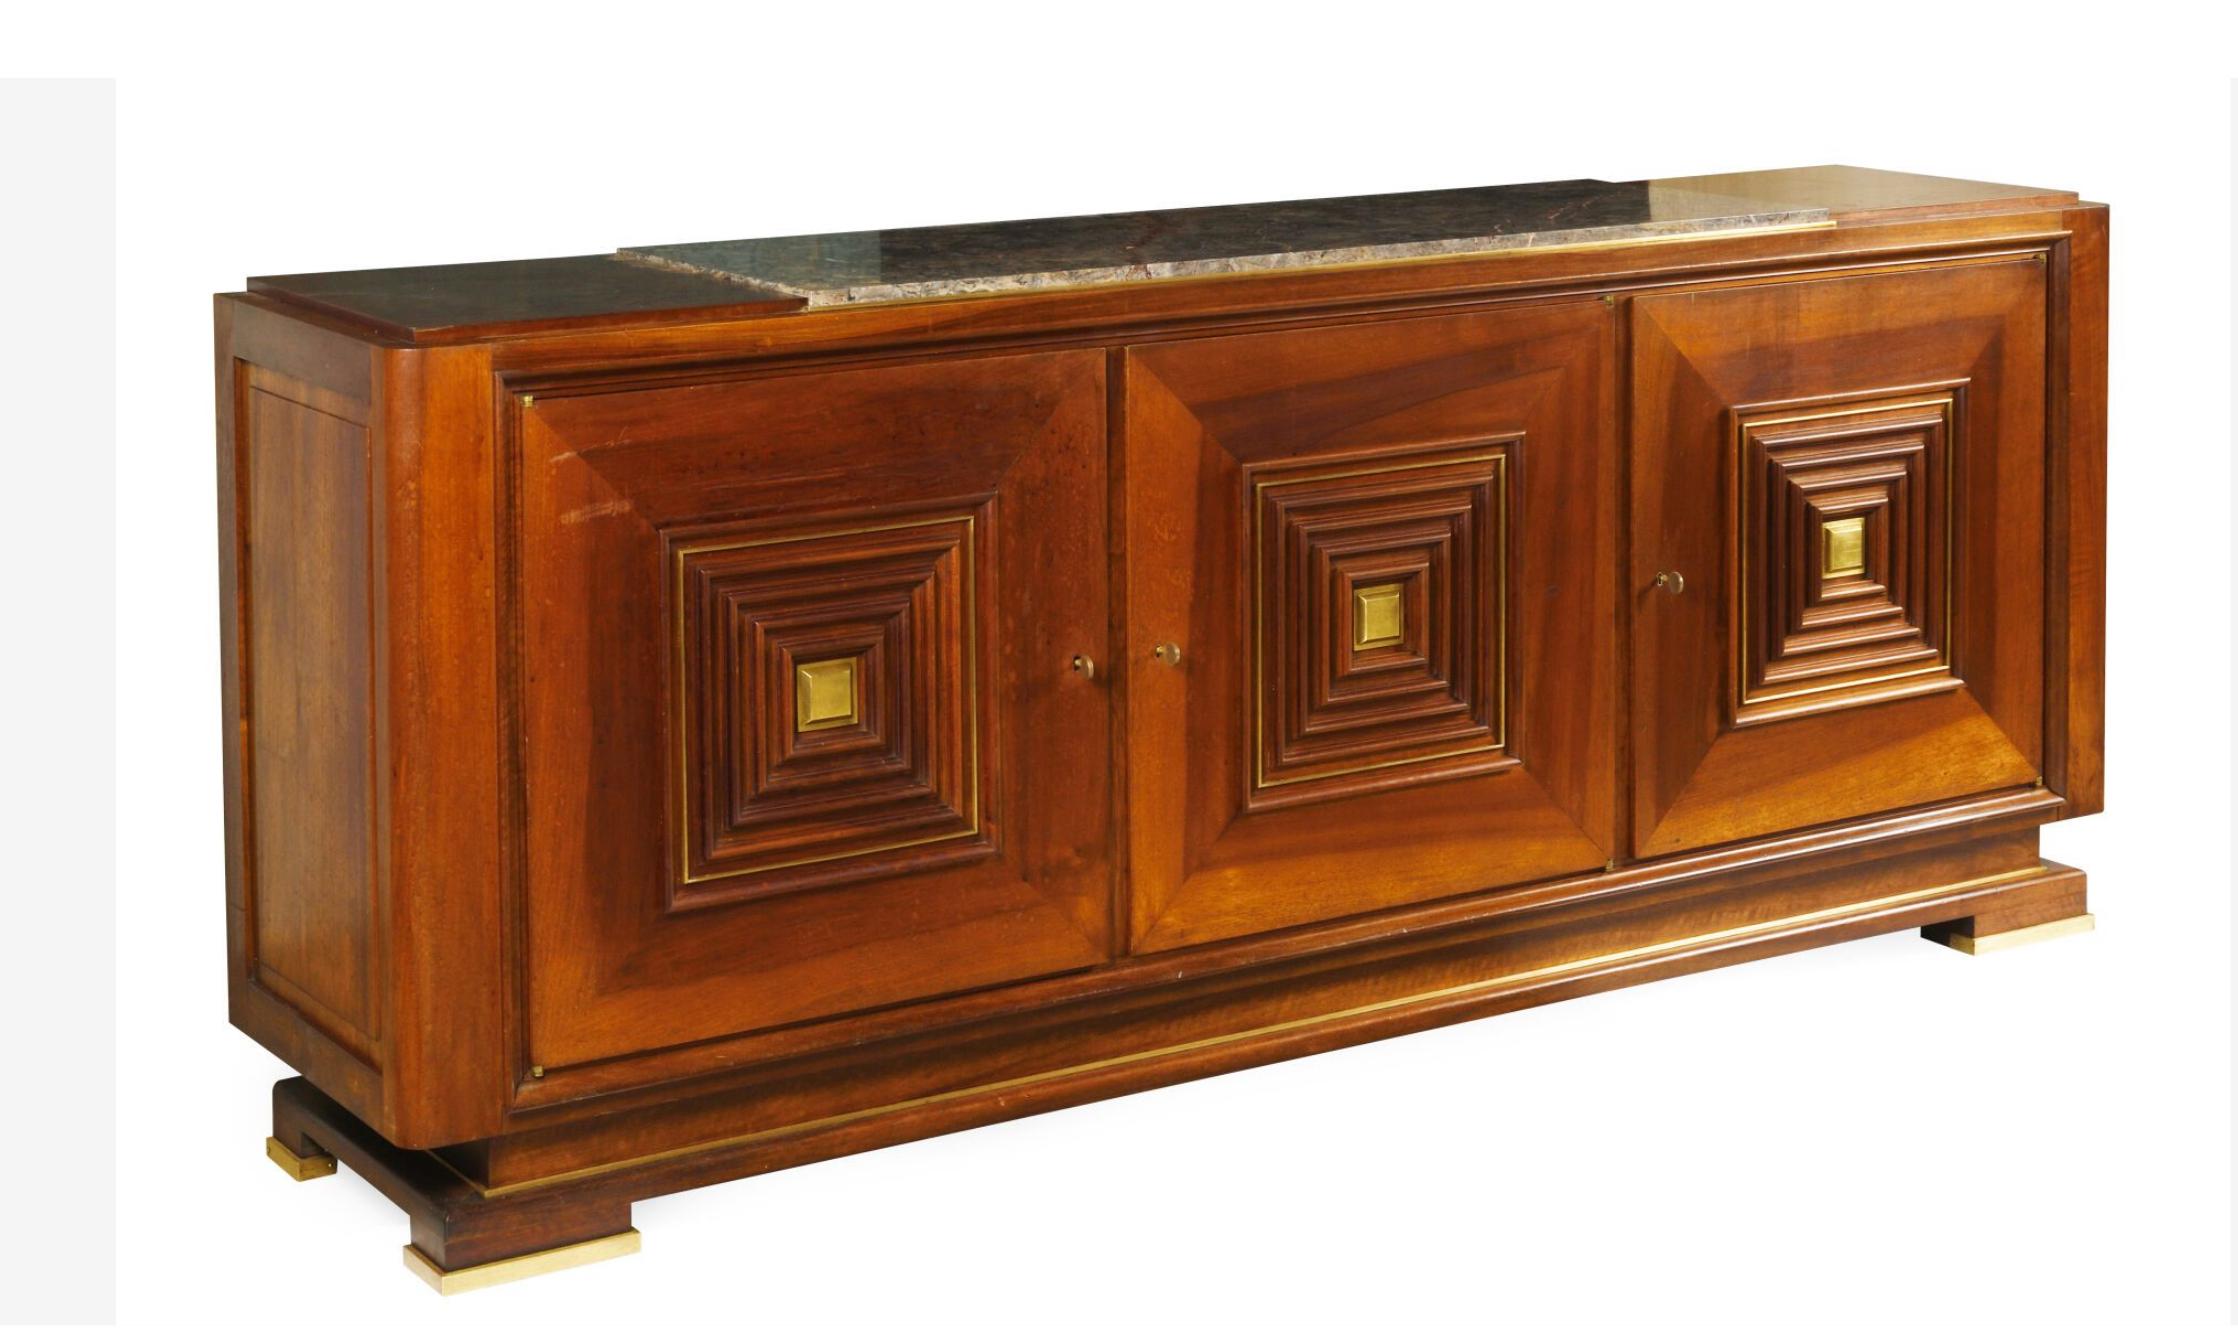 Rectangular vintage mahogany sideboard attributed to the French architect and furniture designer Maxime OLD (1910-1991).
The center of the upper part covered with grey marble, the facade opening with three doors decorated with concentric squares